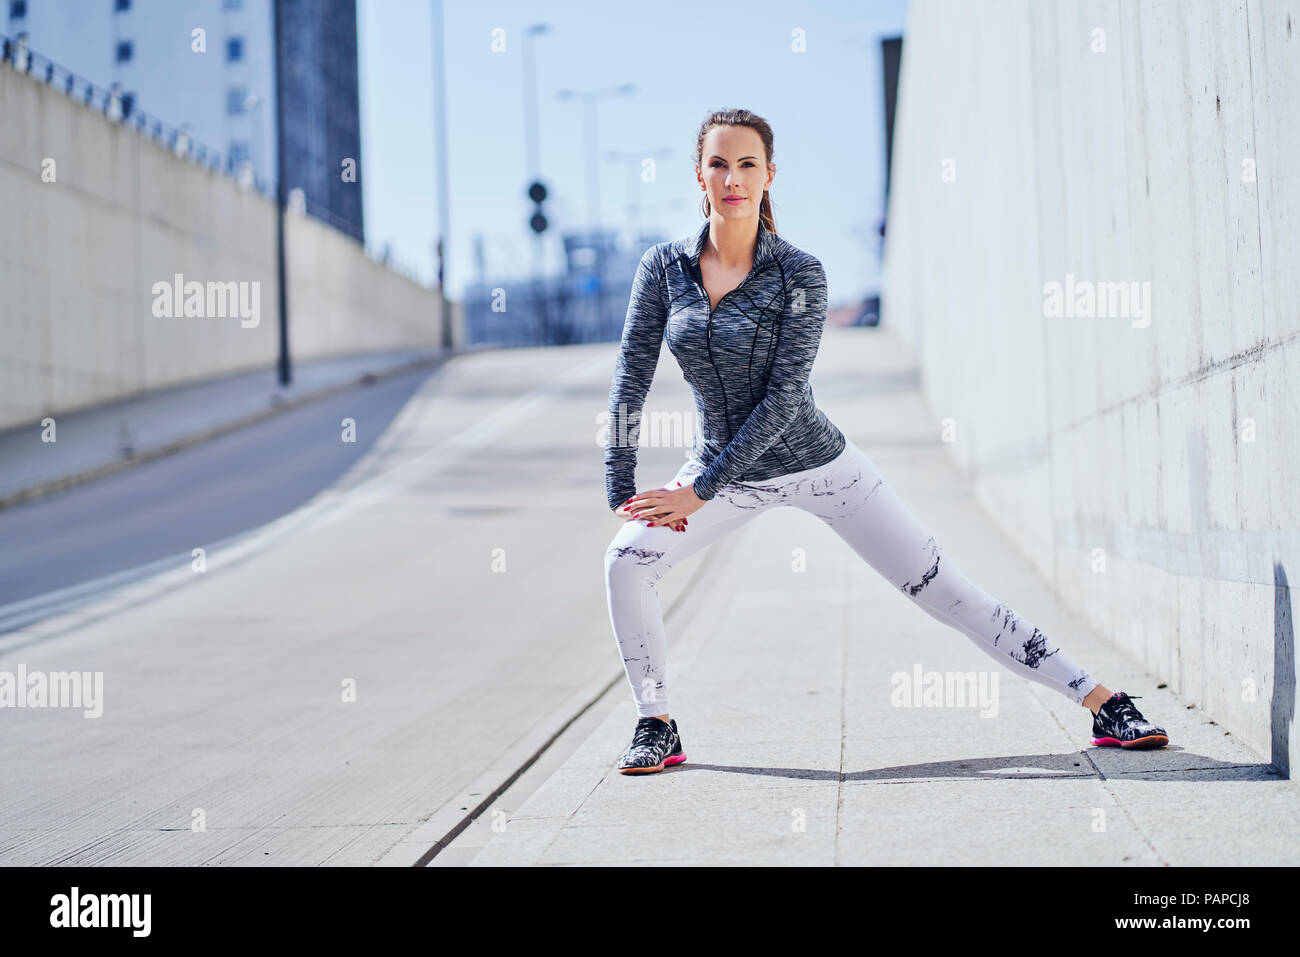 Female runner stretching legs during urban workout Stock Photo